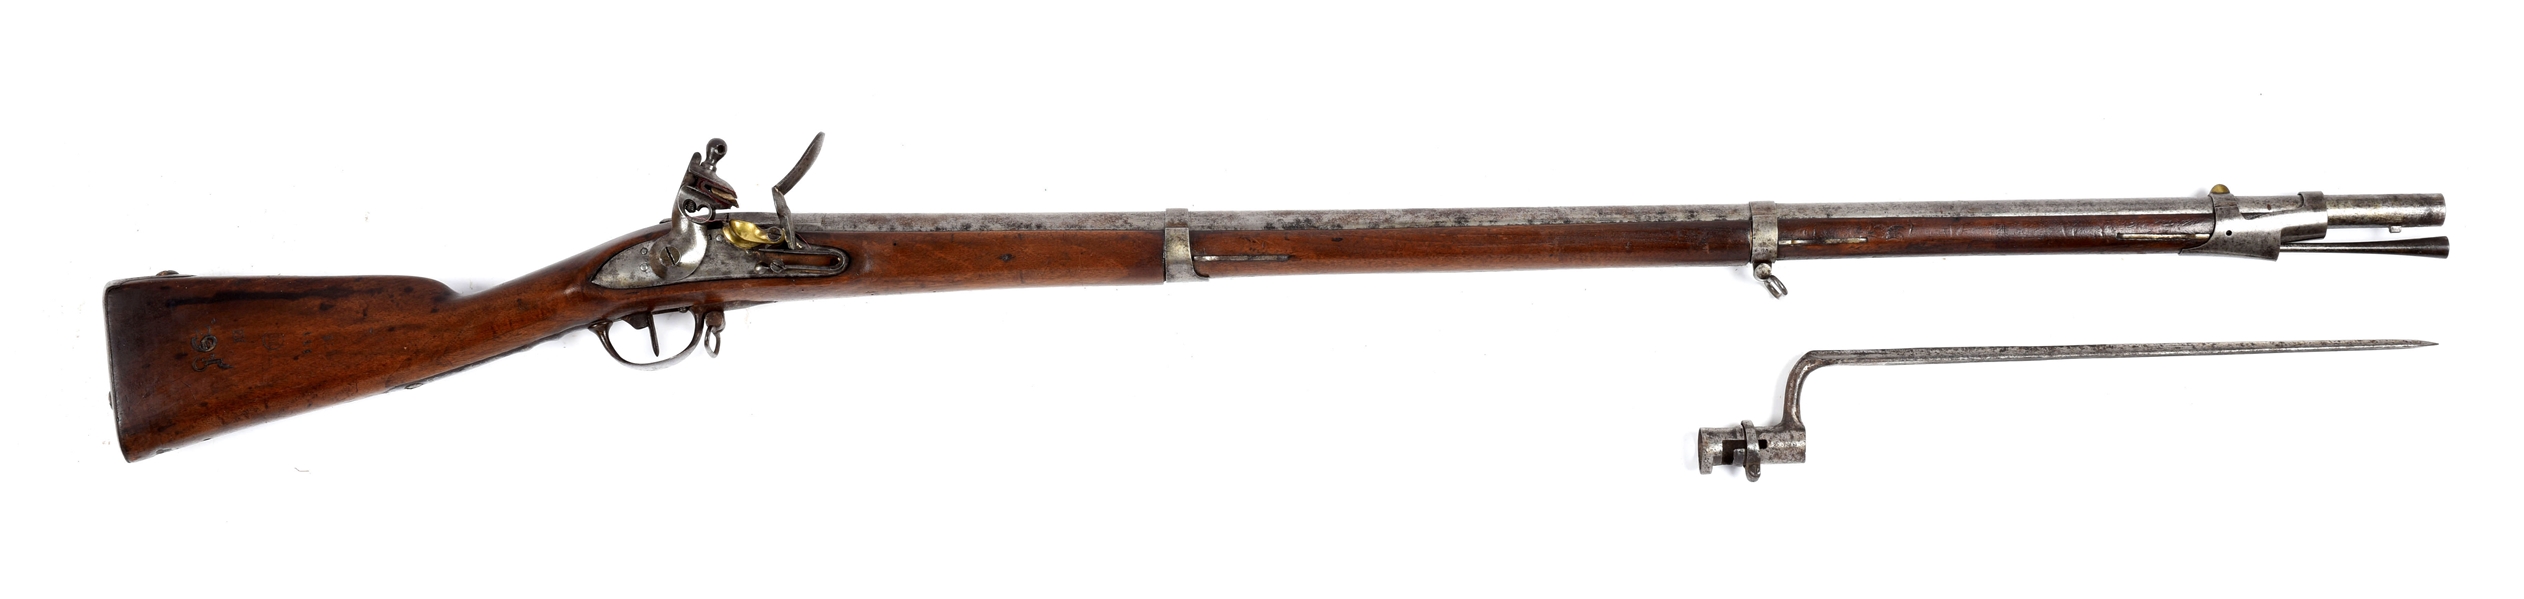 (A) NAPOLEONIC BELGIAN MADE FRENCH MODEL 1777 STYLE FLINTLOCK MUSKET WITH BAYONET.